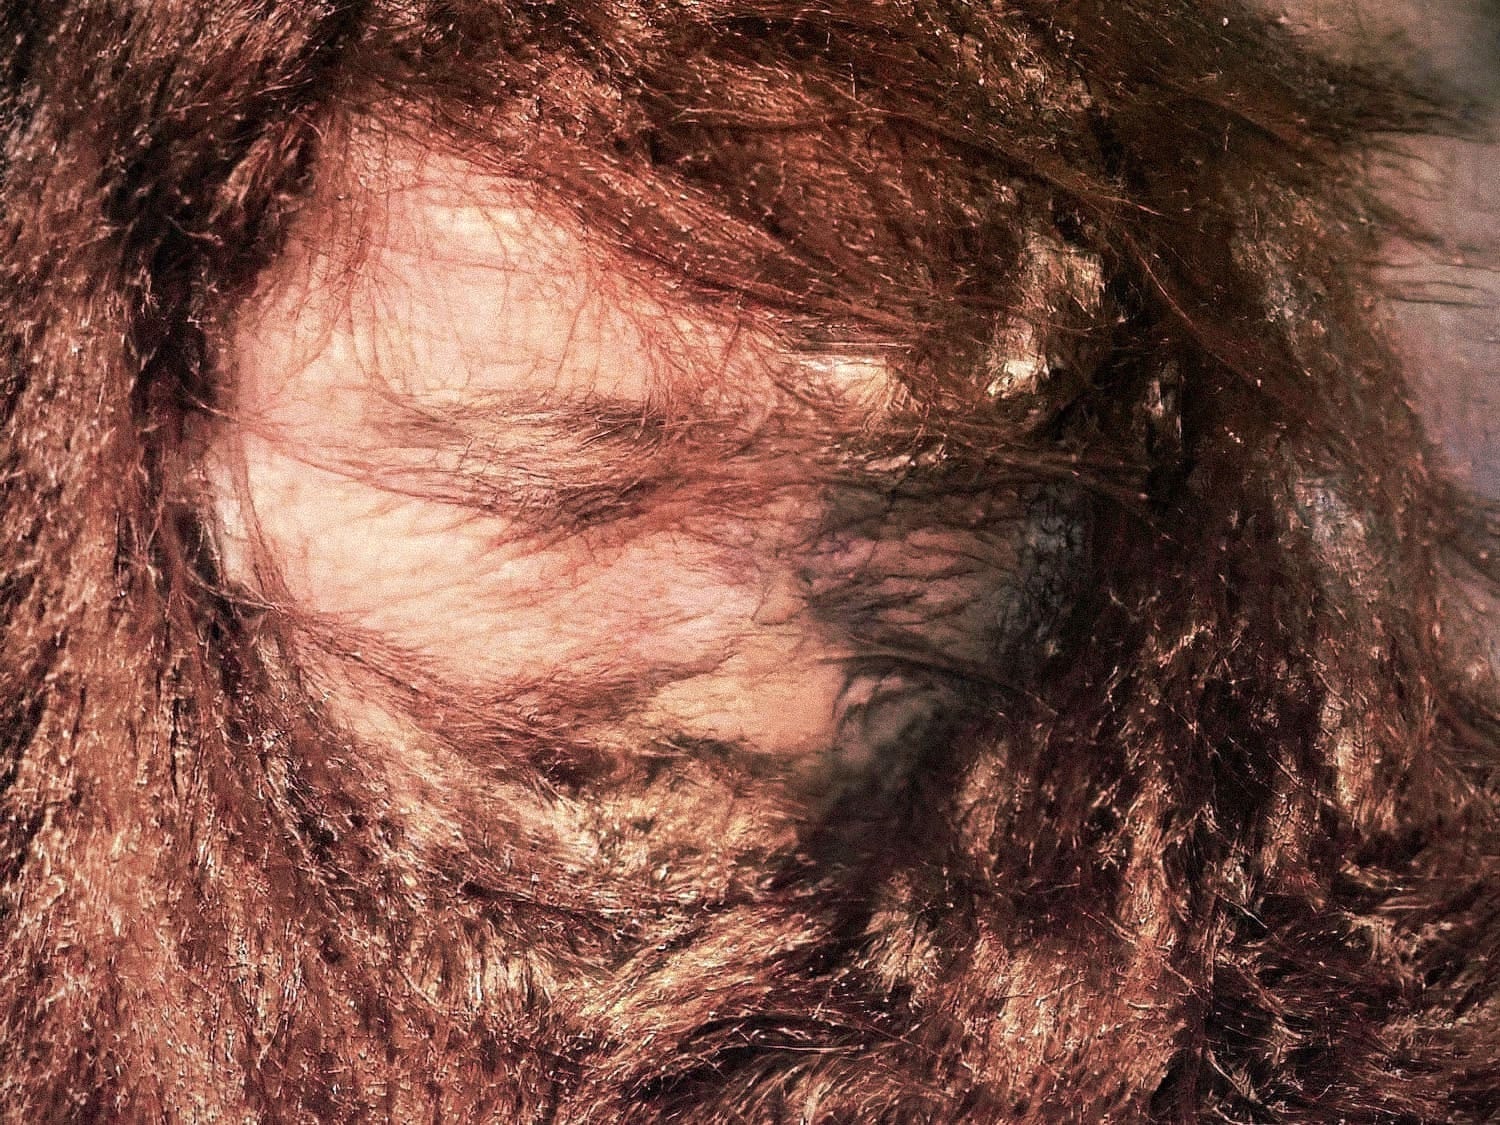 A computer generated image of  deformed face of a person with red hair